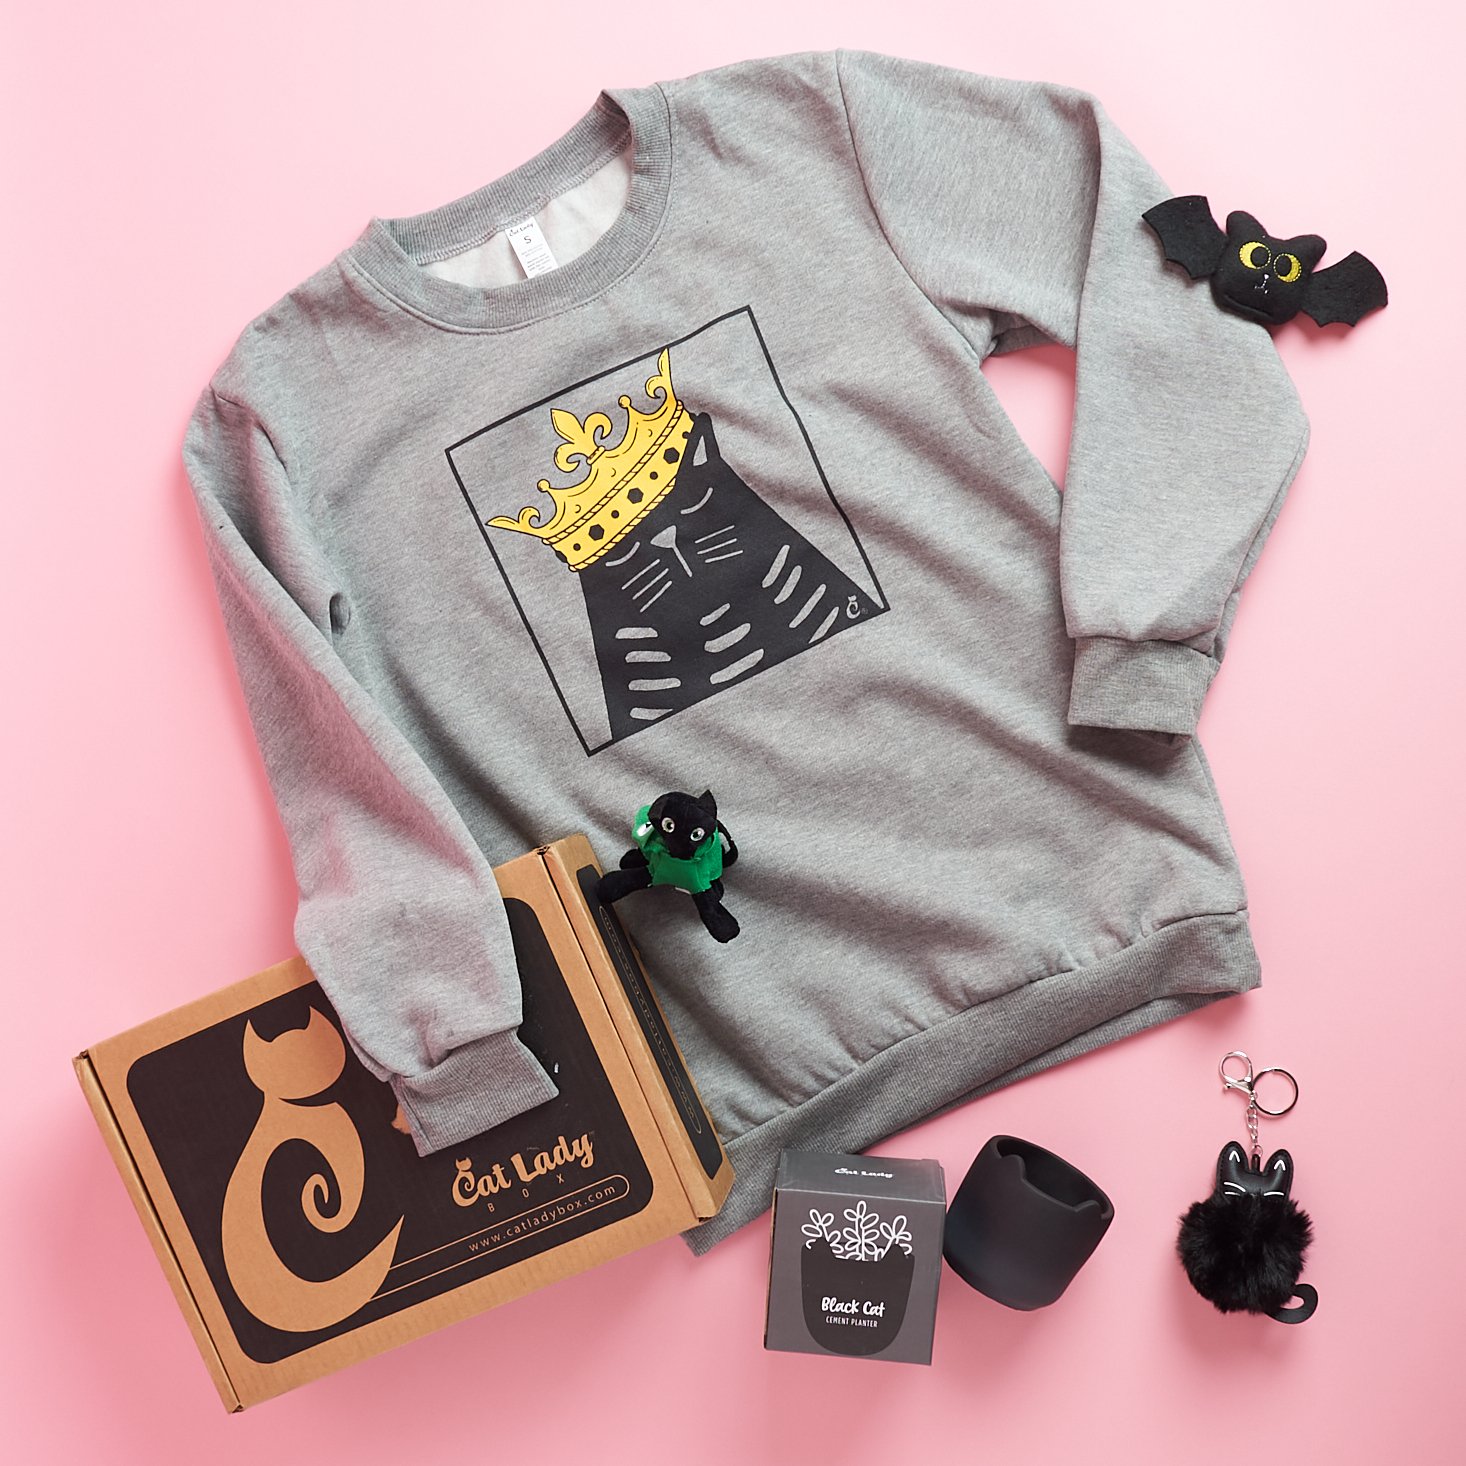 LAST CHANCE – Cat Lady Box Black Friday 2021 Coupons: 30% Off + Free Shipping